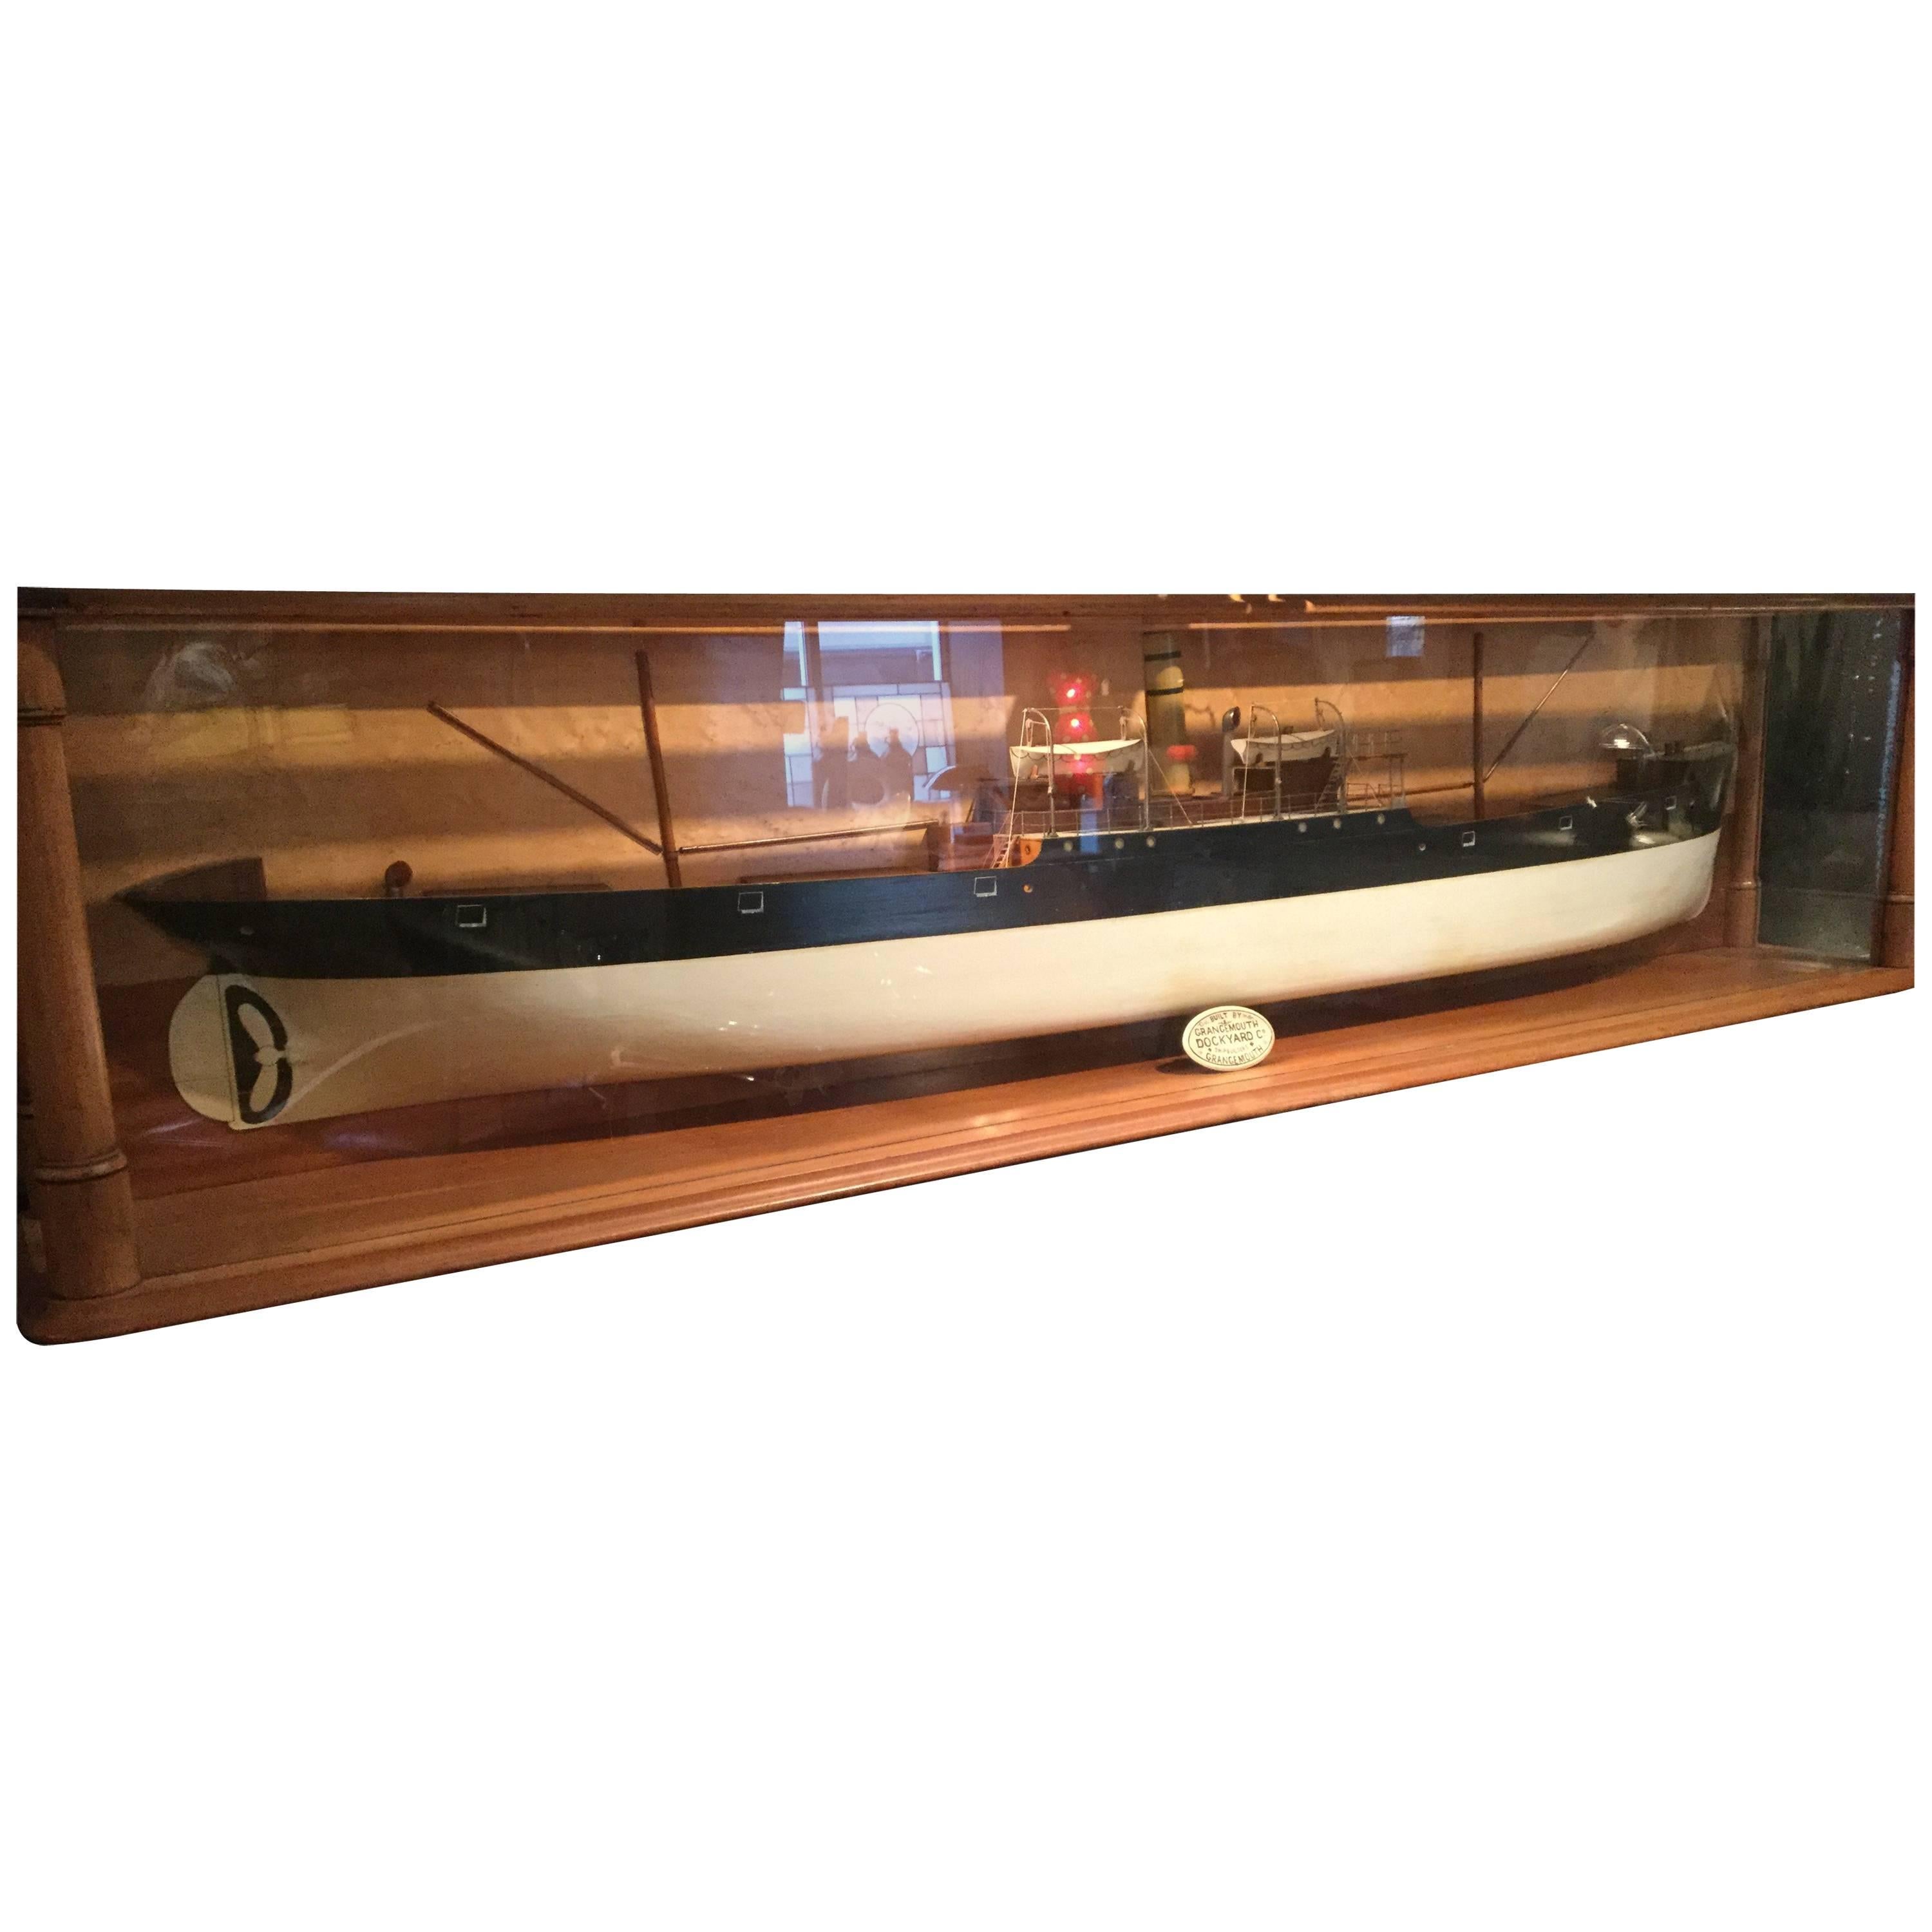 Large Antique Steamship Model 19th Century Cased For Sale